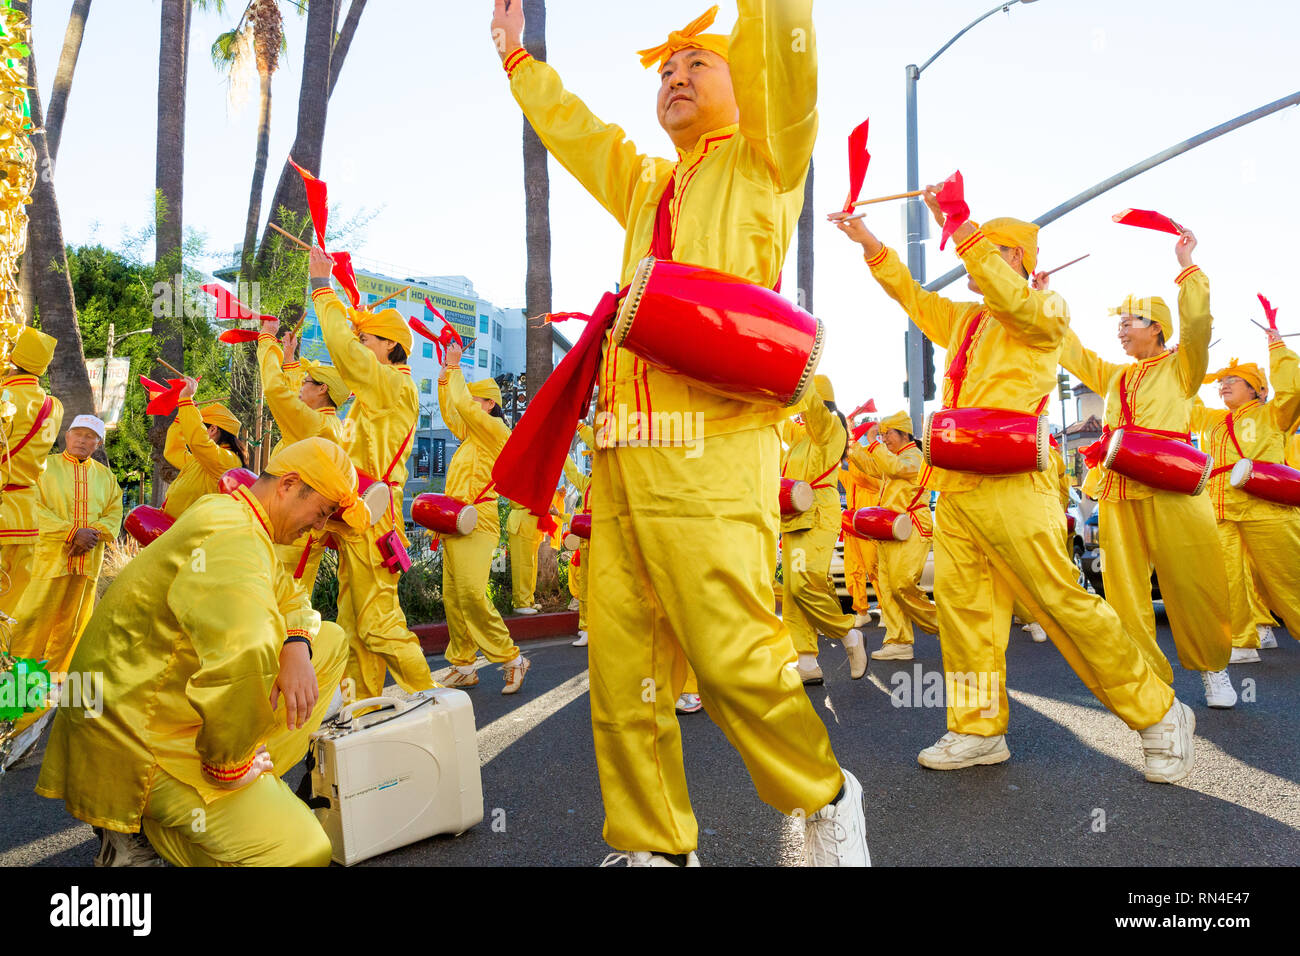 Falun Gong followers in bright yellow uniforms marching in Christmas parade on Hollywood Blvd in Los Angeles, California. Stock Photo